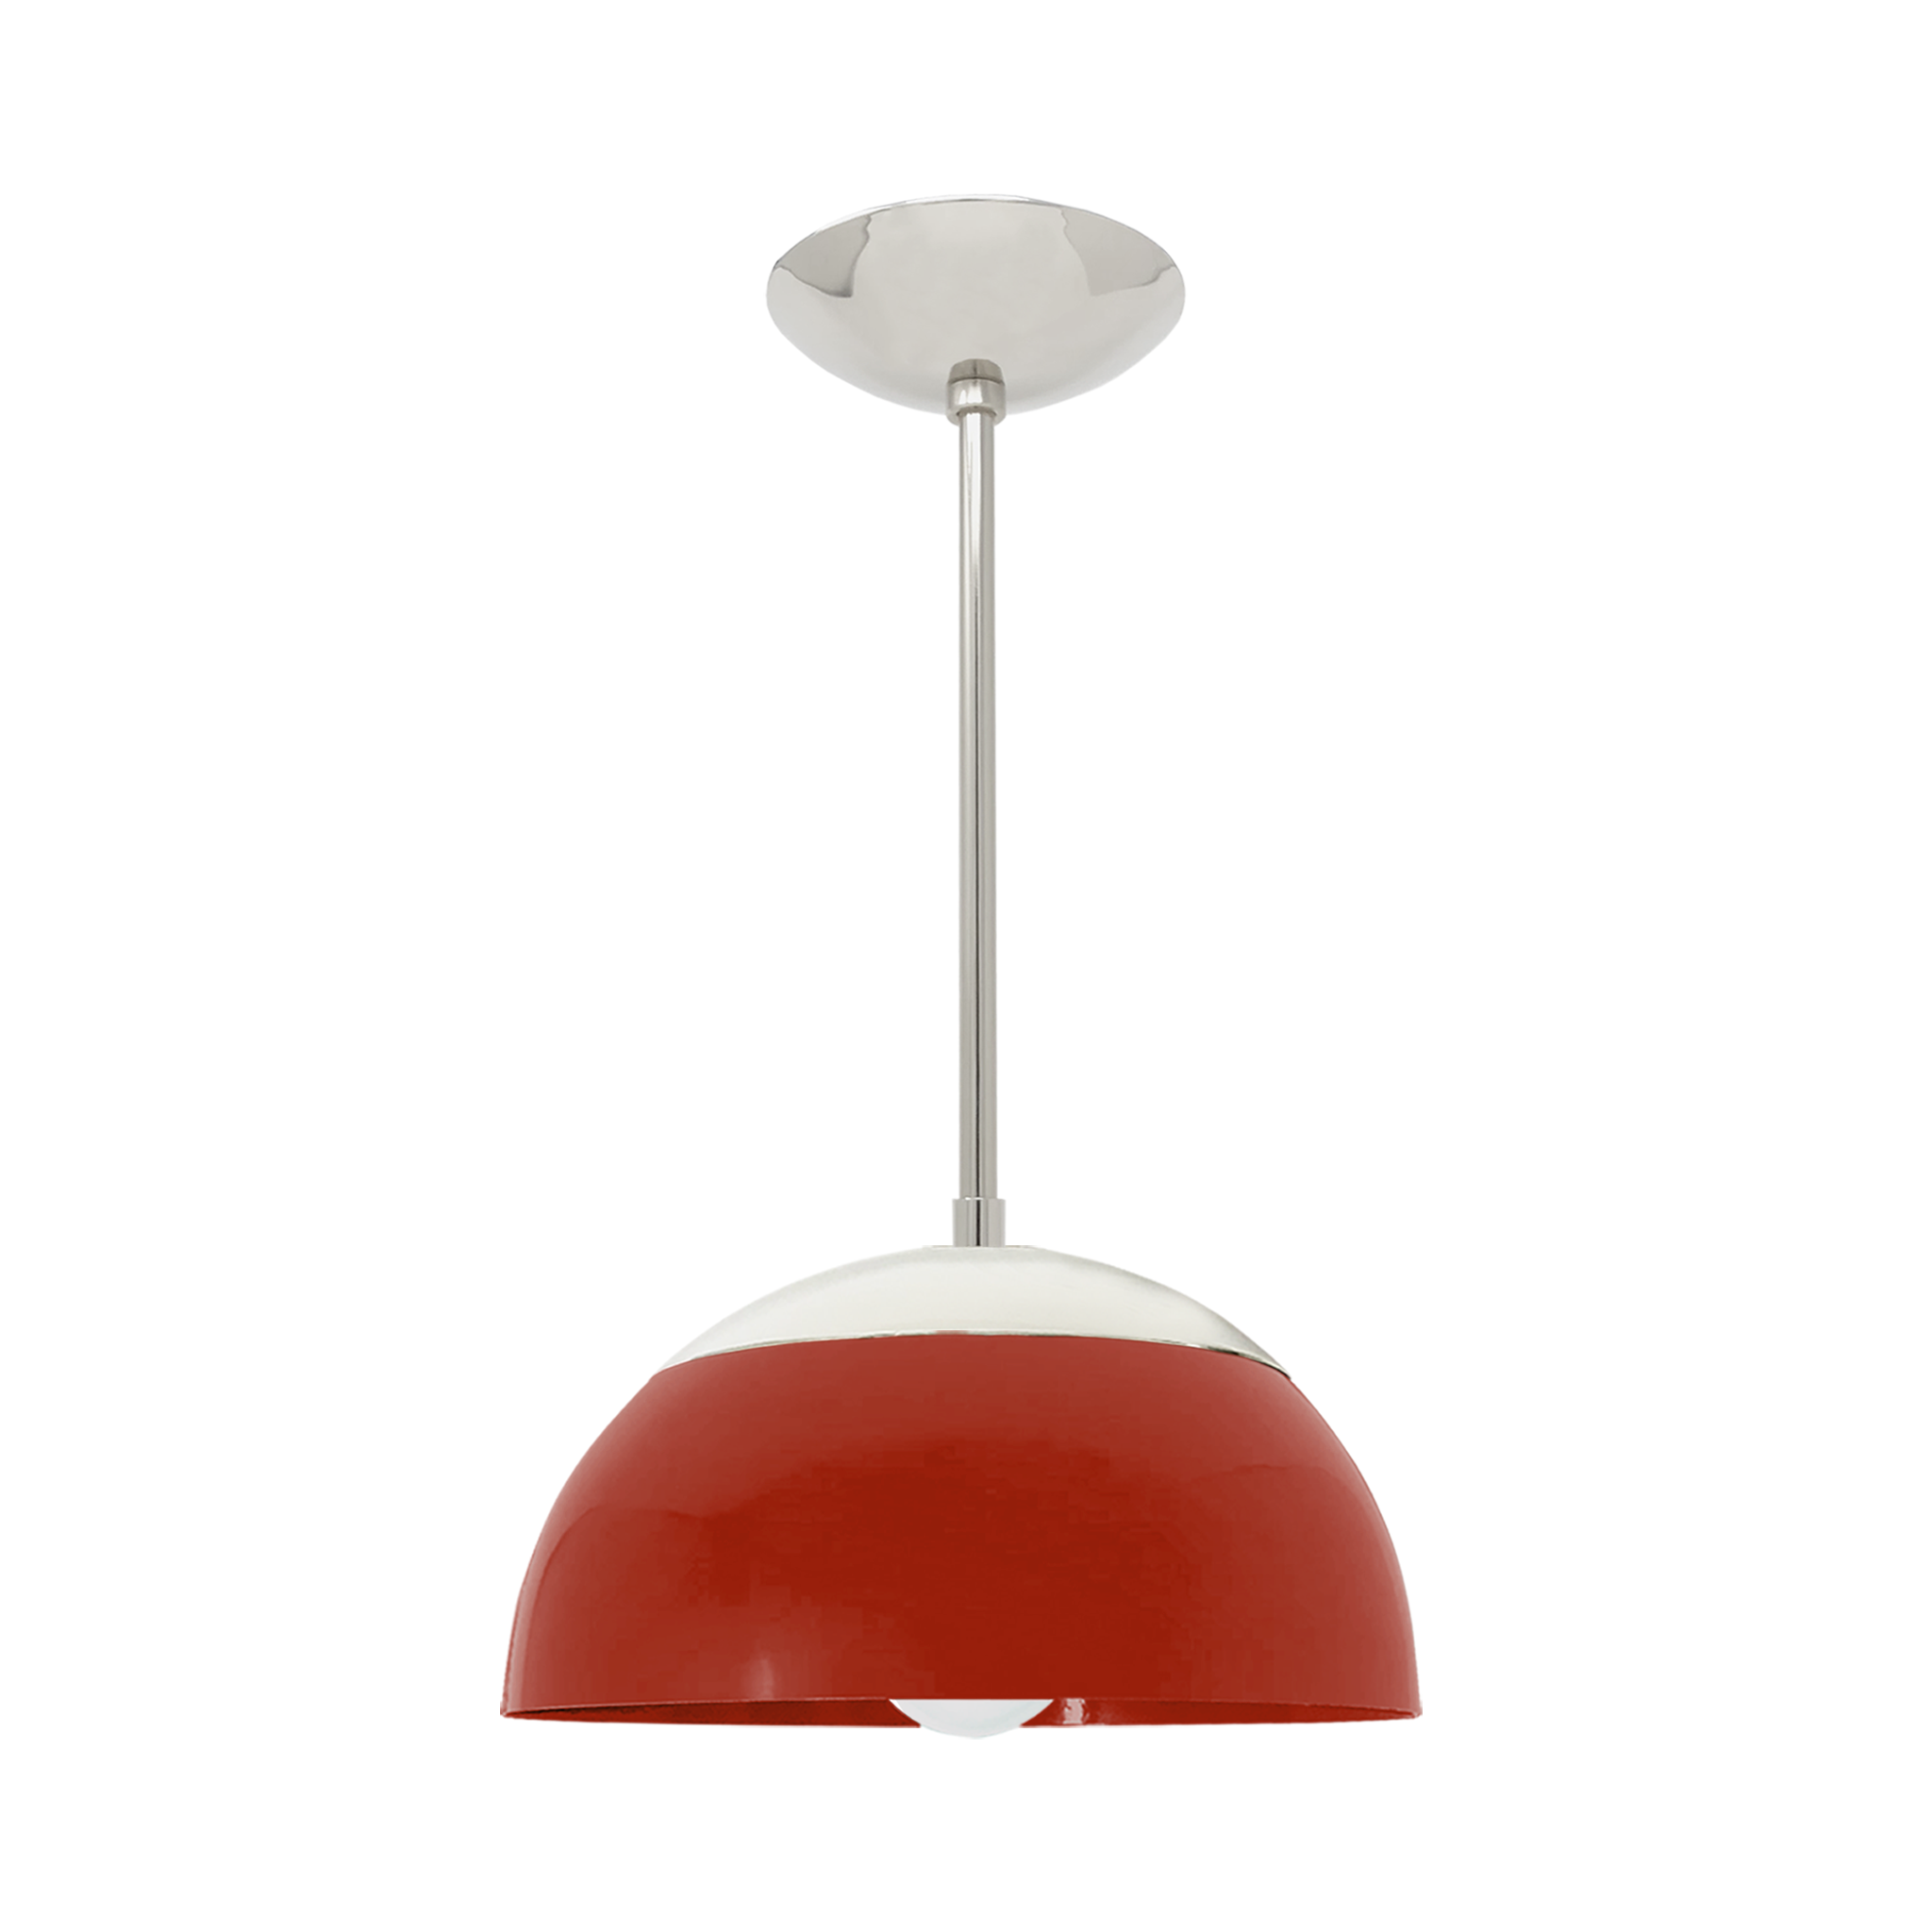 Nickel and riding hood red color Cadbury pendant 12" Dutton Brown lighting